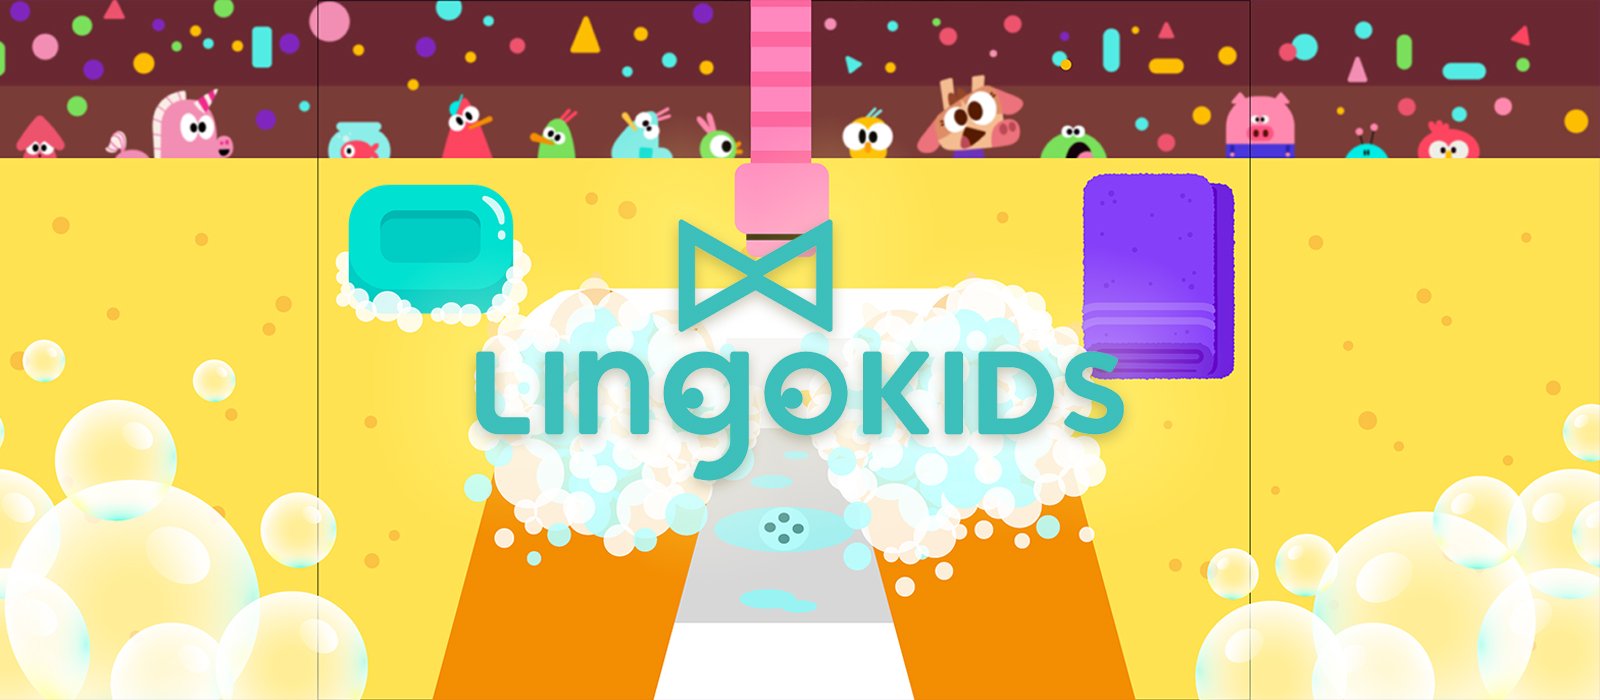 With 25 million users, Madrid-based edtech Lingokids tripled growth over 2020, looks towards rapid expansion